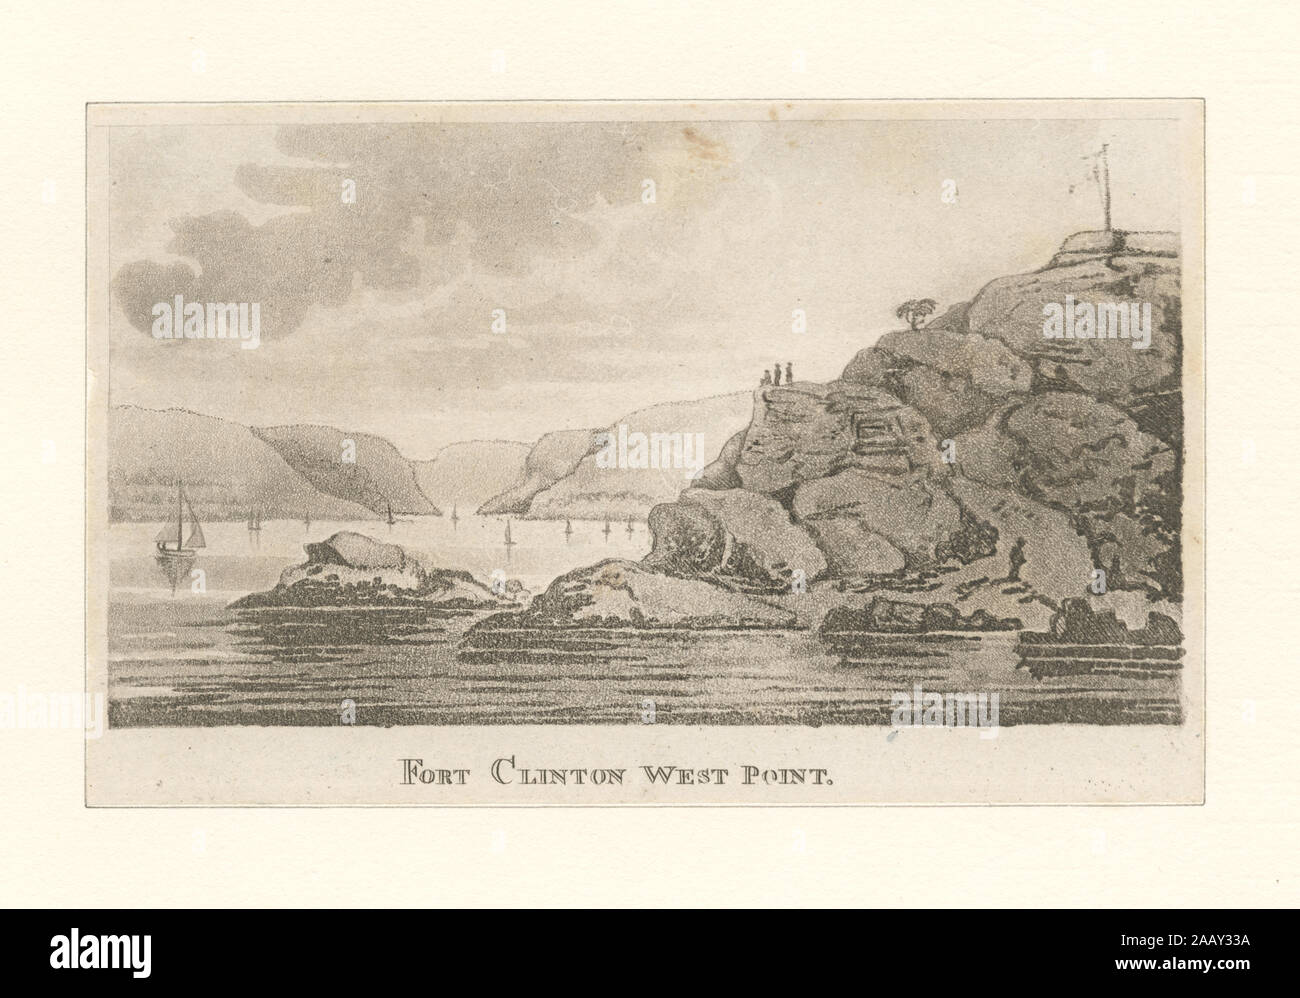 Fort Clinton, West Point Printmakers include Henry Bryan Hall and Peter Maverick. Title from Calendar of Emmet Collection. EM9017; Fort Clinton, West Point. Stock Photo